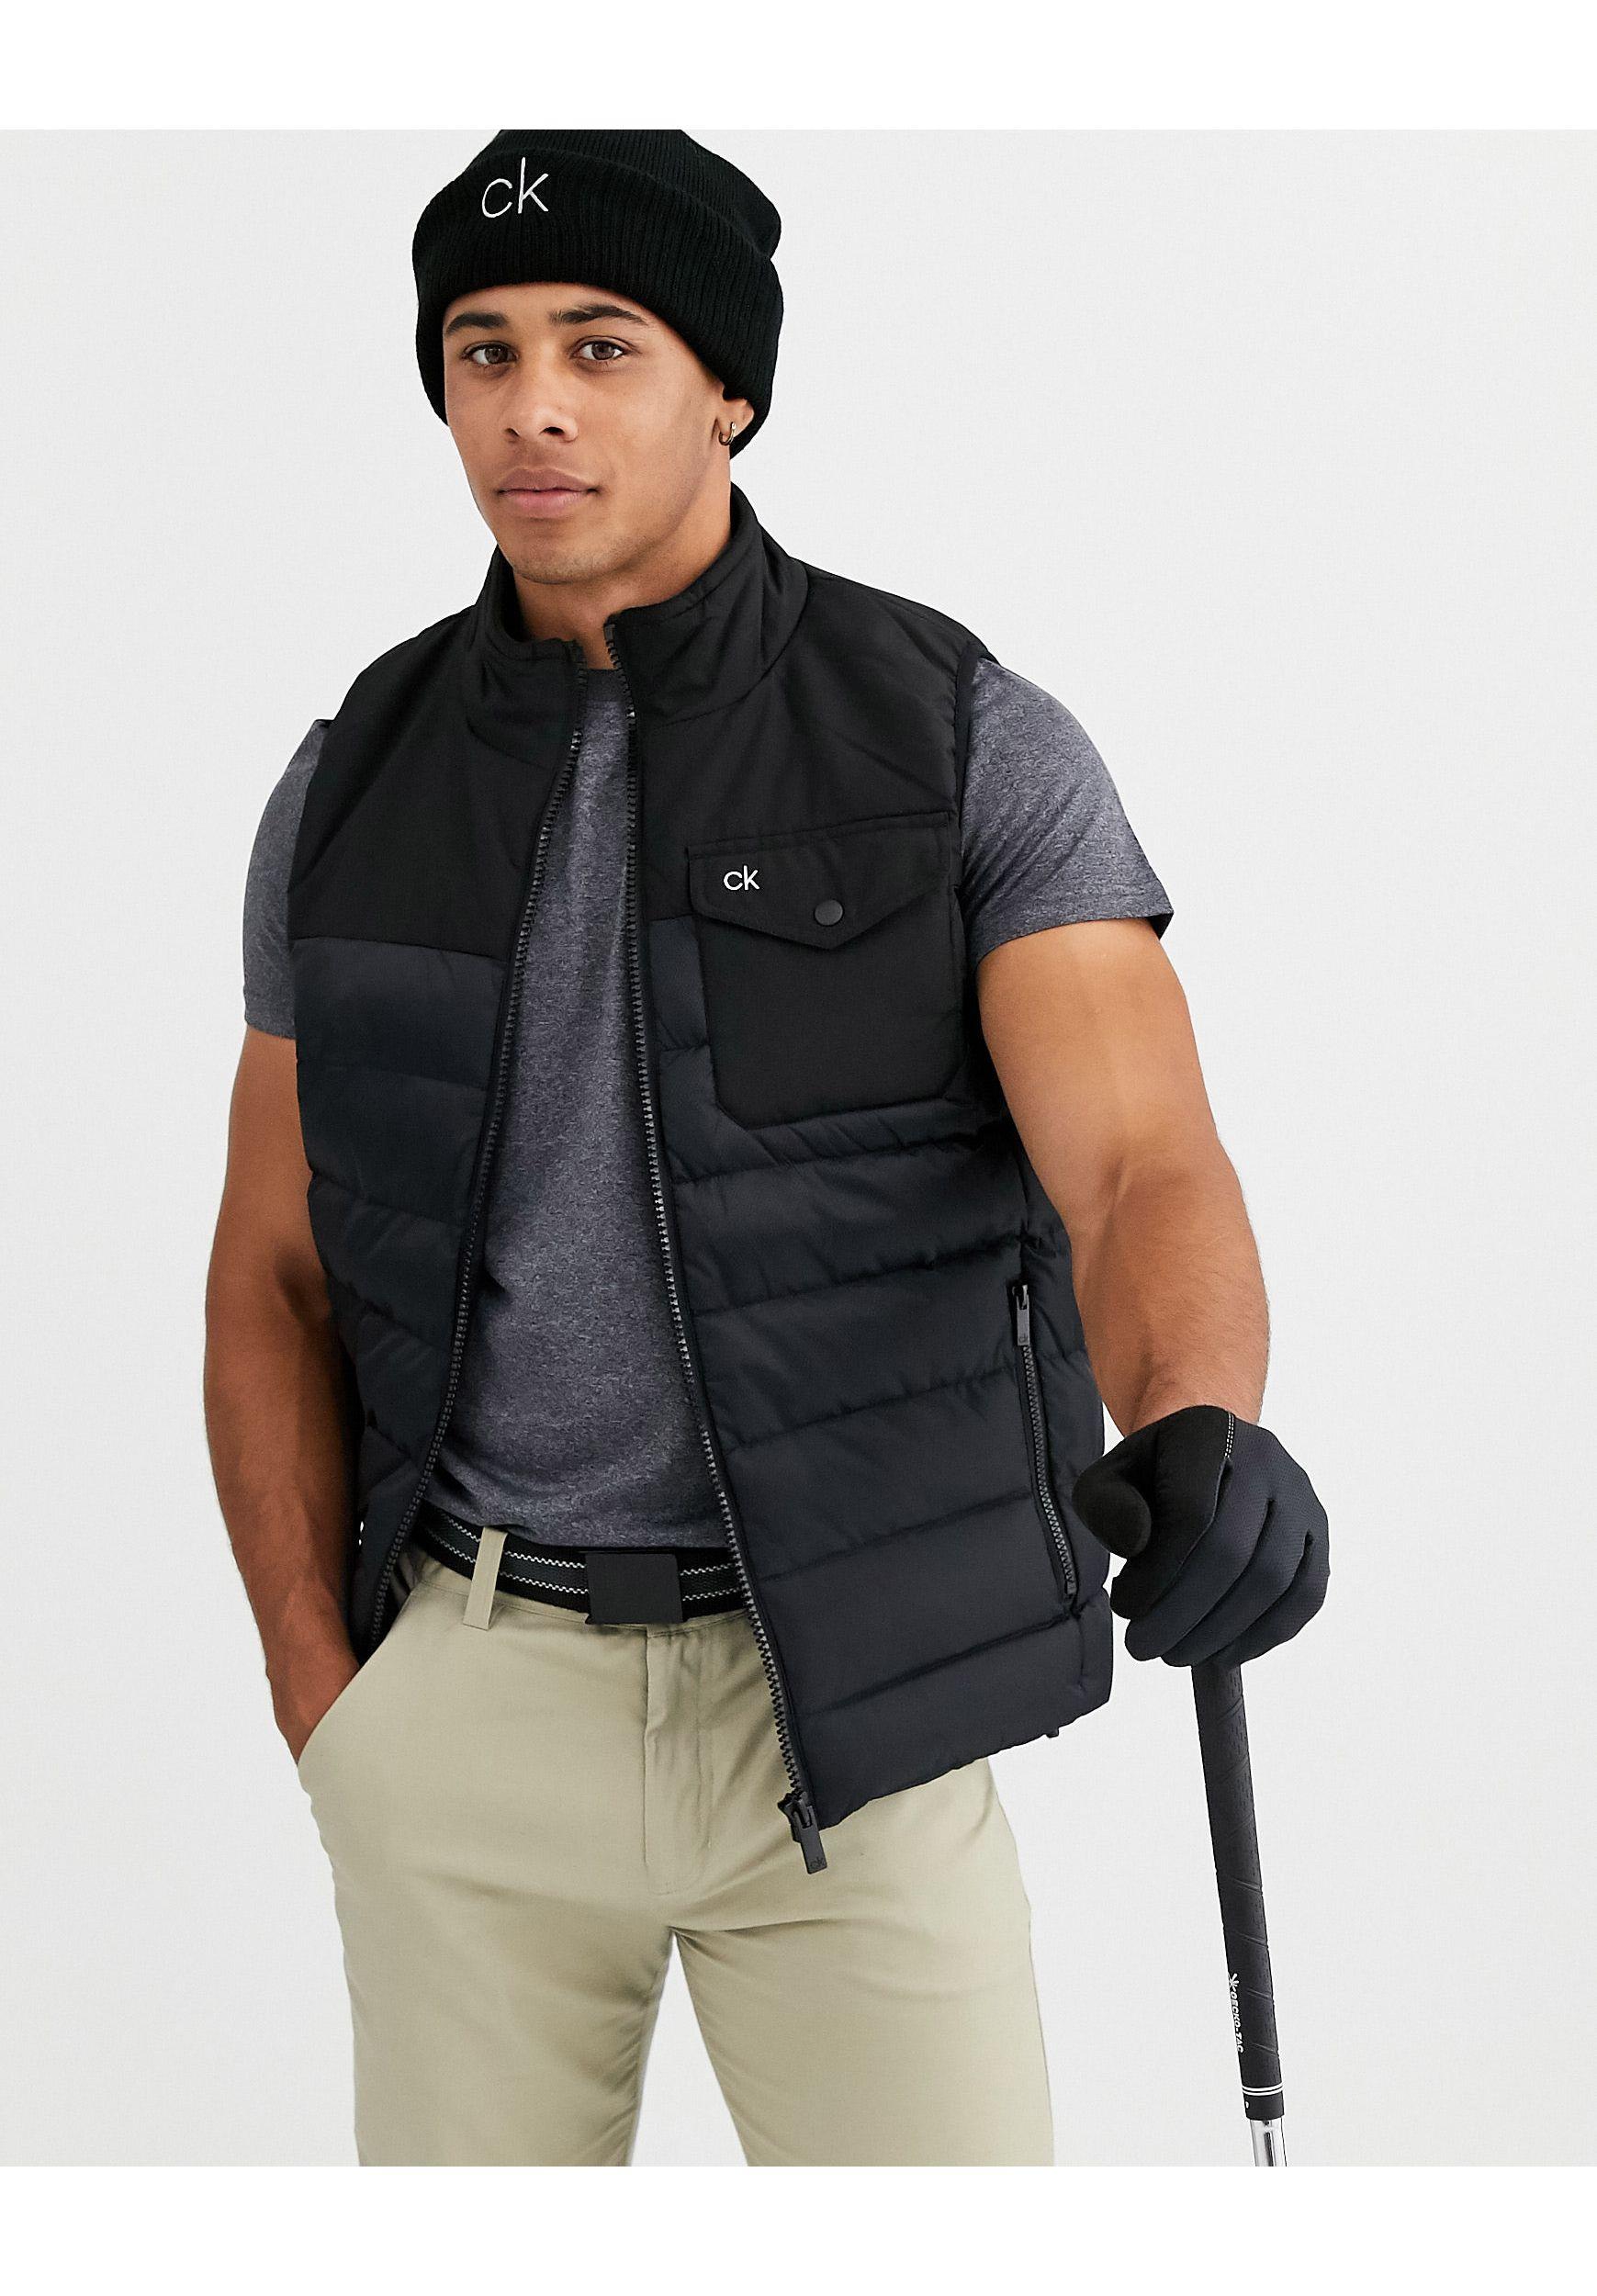 ck gilet Cheaper Than Retail Price> Buy Clothing, Accessories and lifestyle  products for women & men -